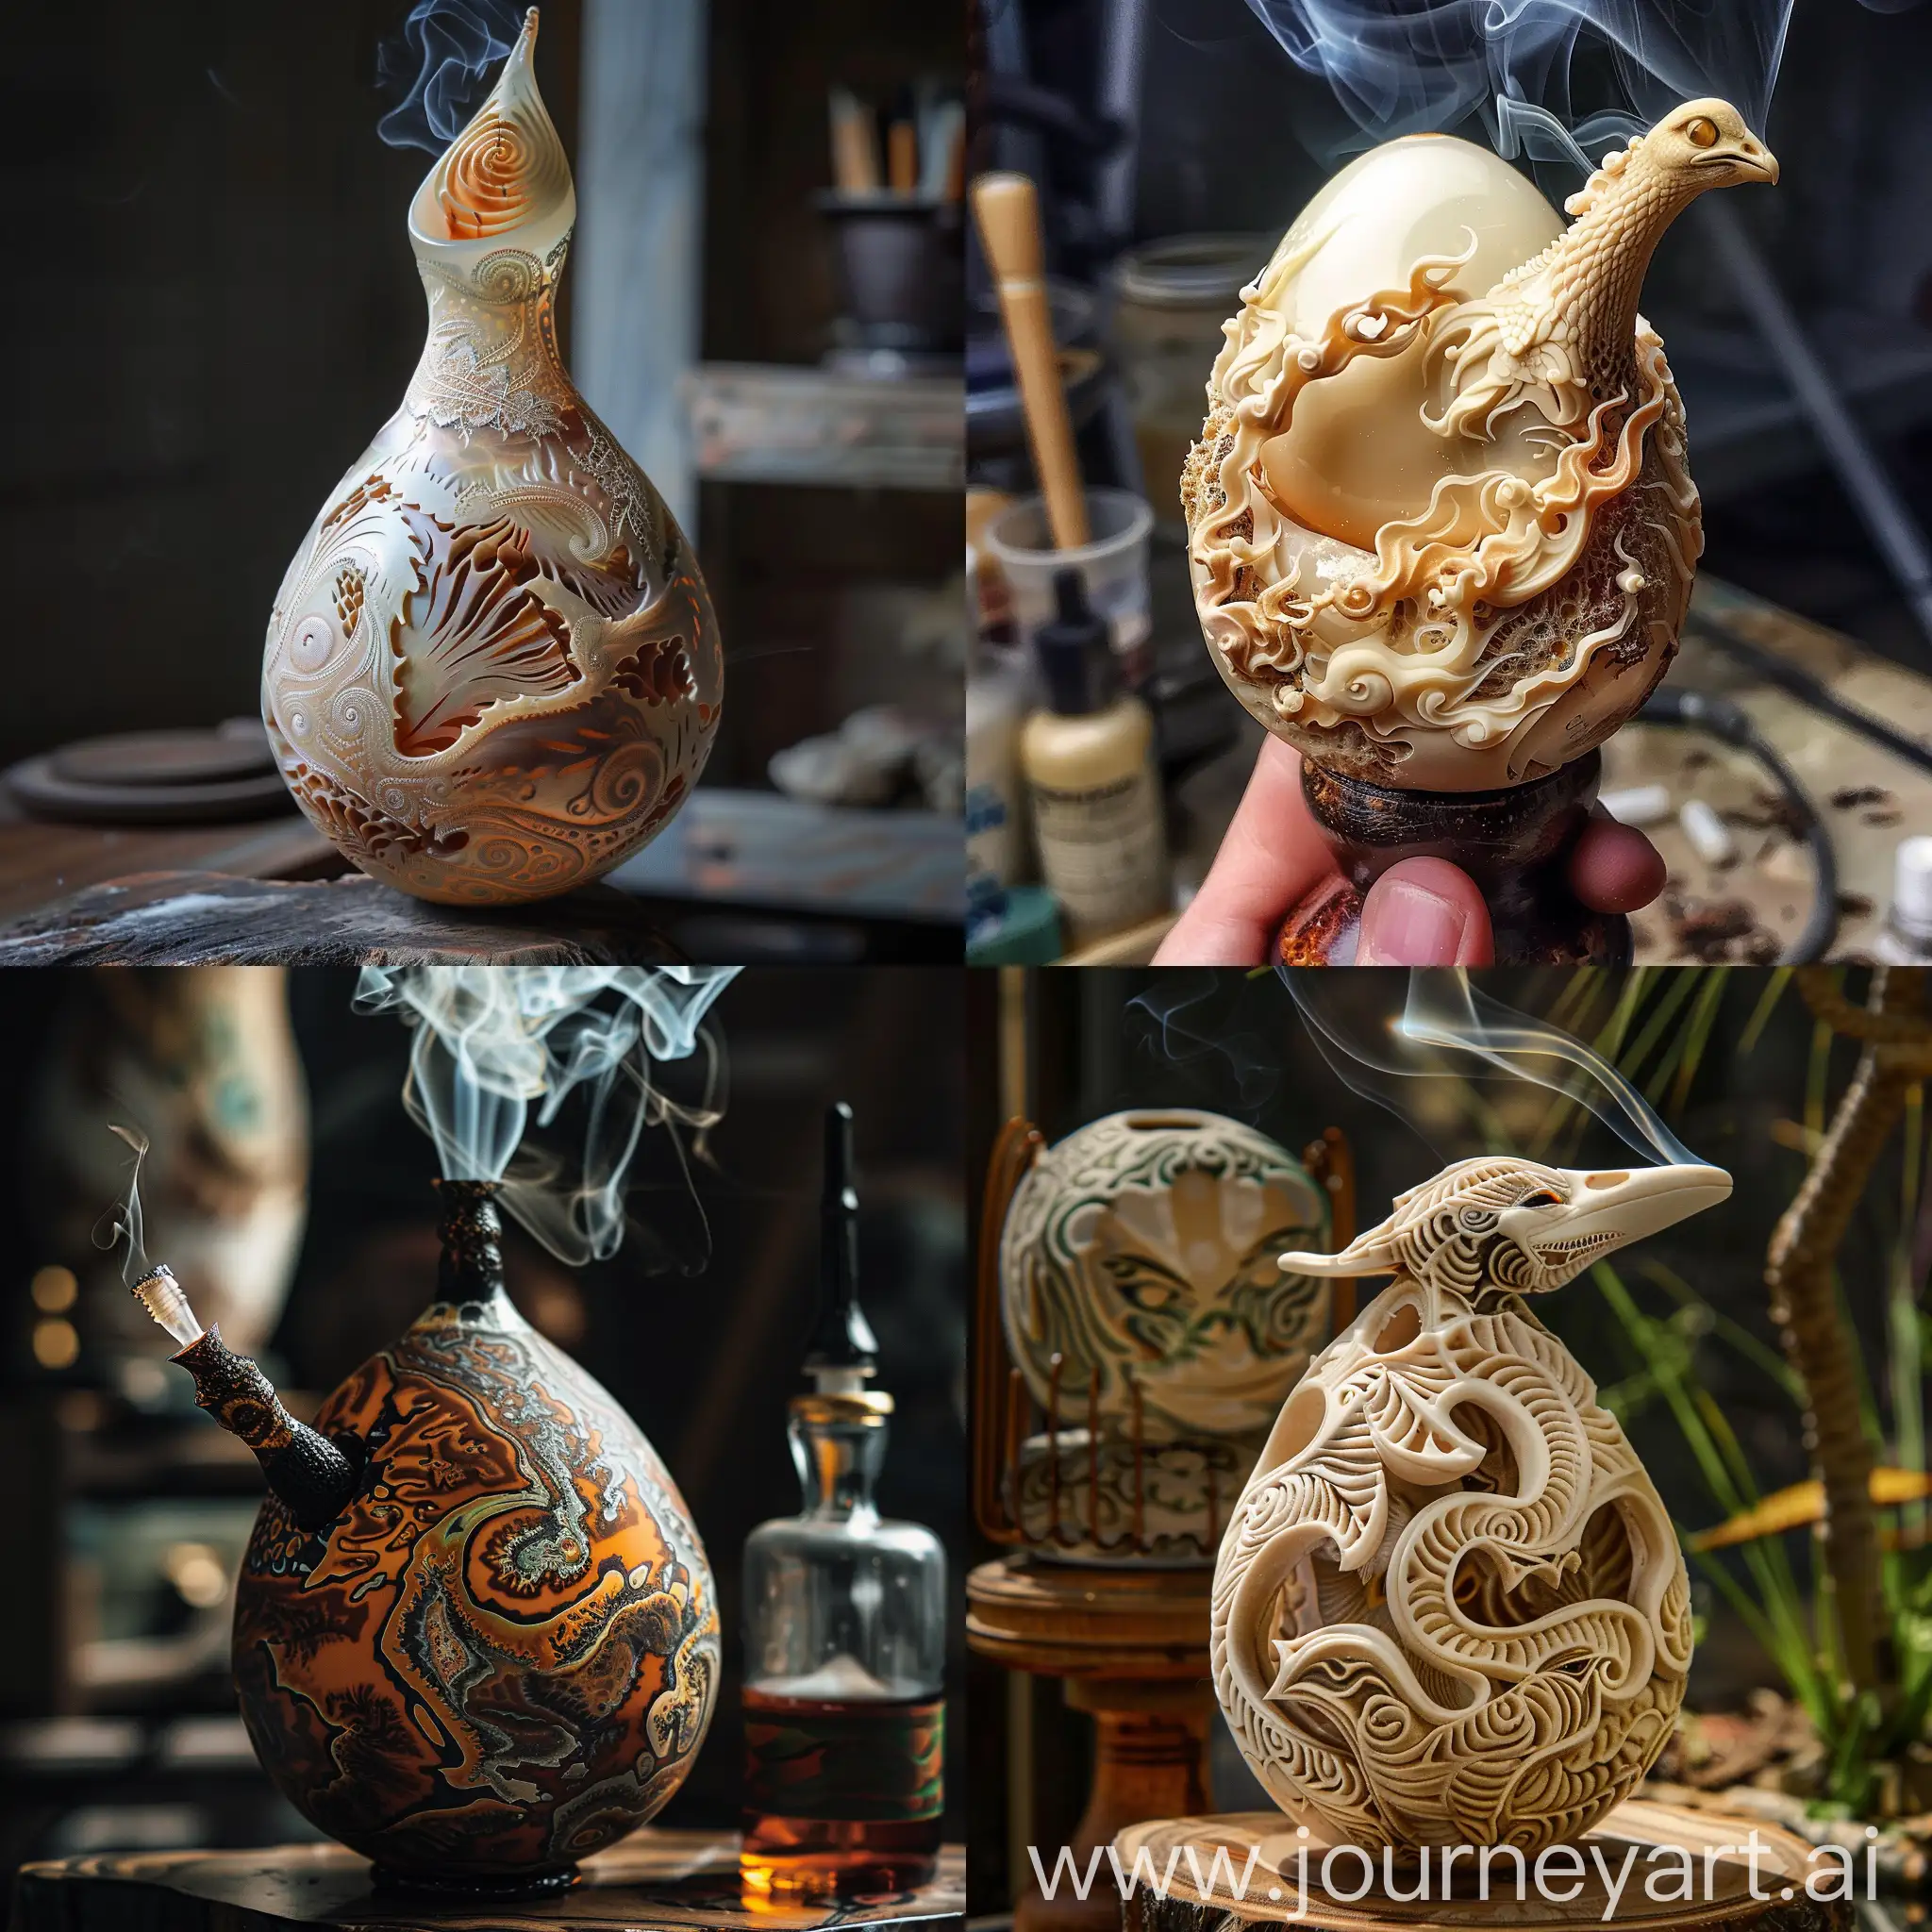 Smoking out of an ostrich egg that's intricately designed and molded into a gravity bong